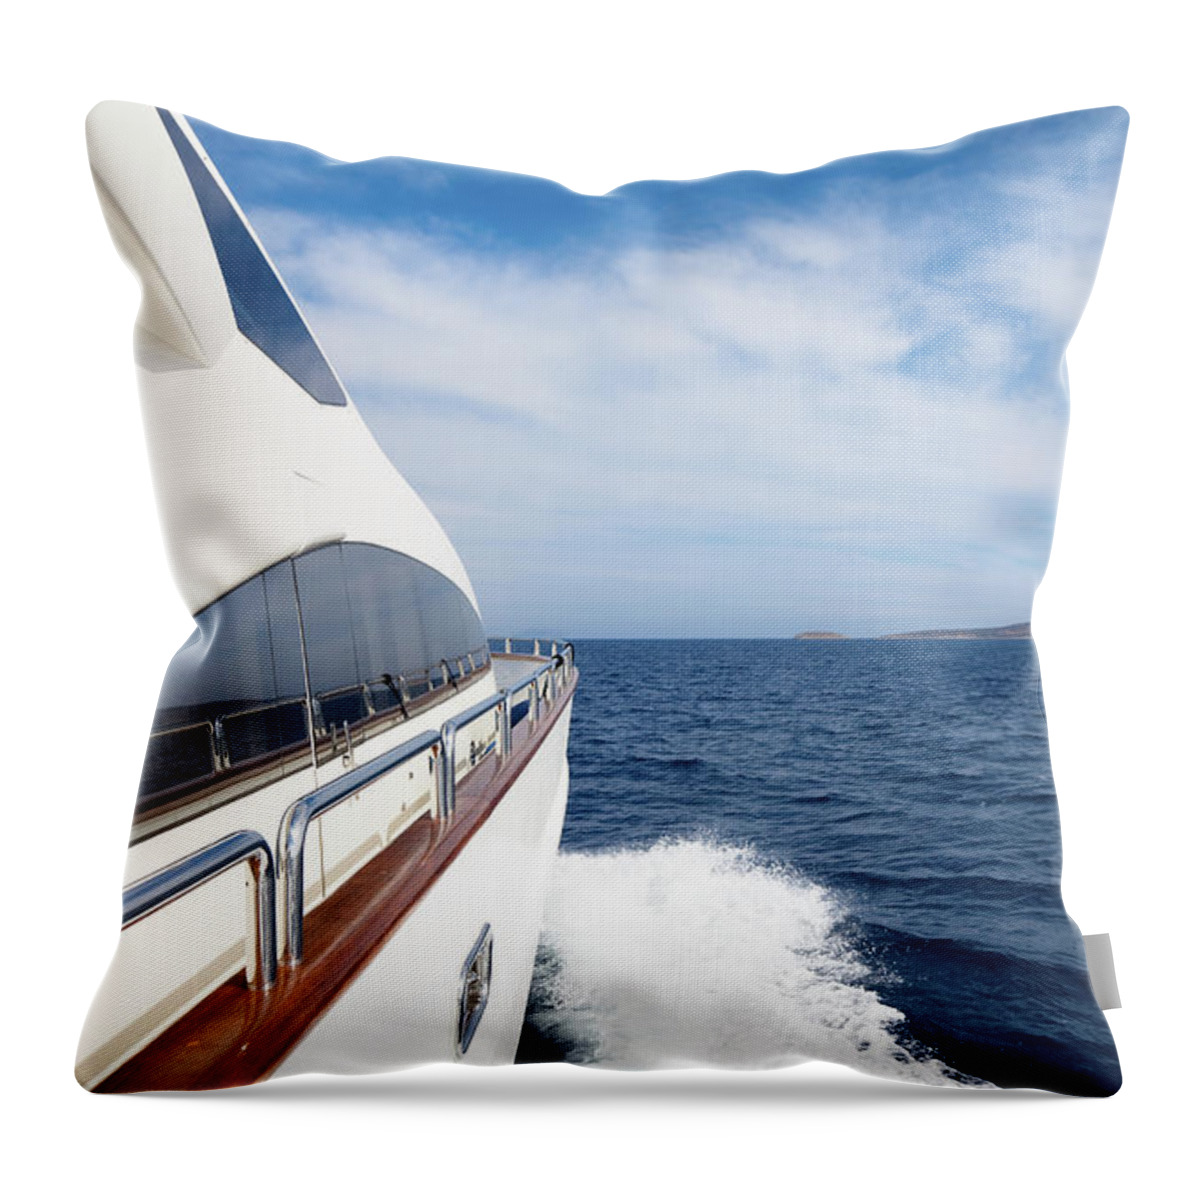 Seascape Throw Pillow featuring the photograph Luxury Yacht Sailing In The Ocean by Petreplesea